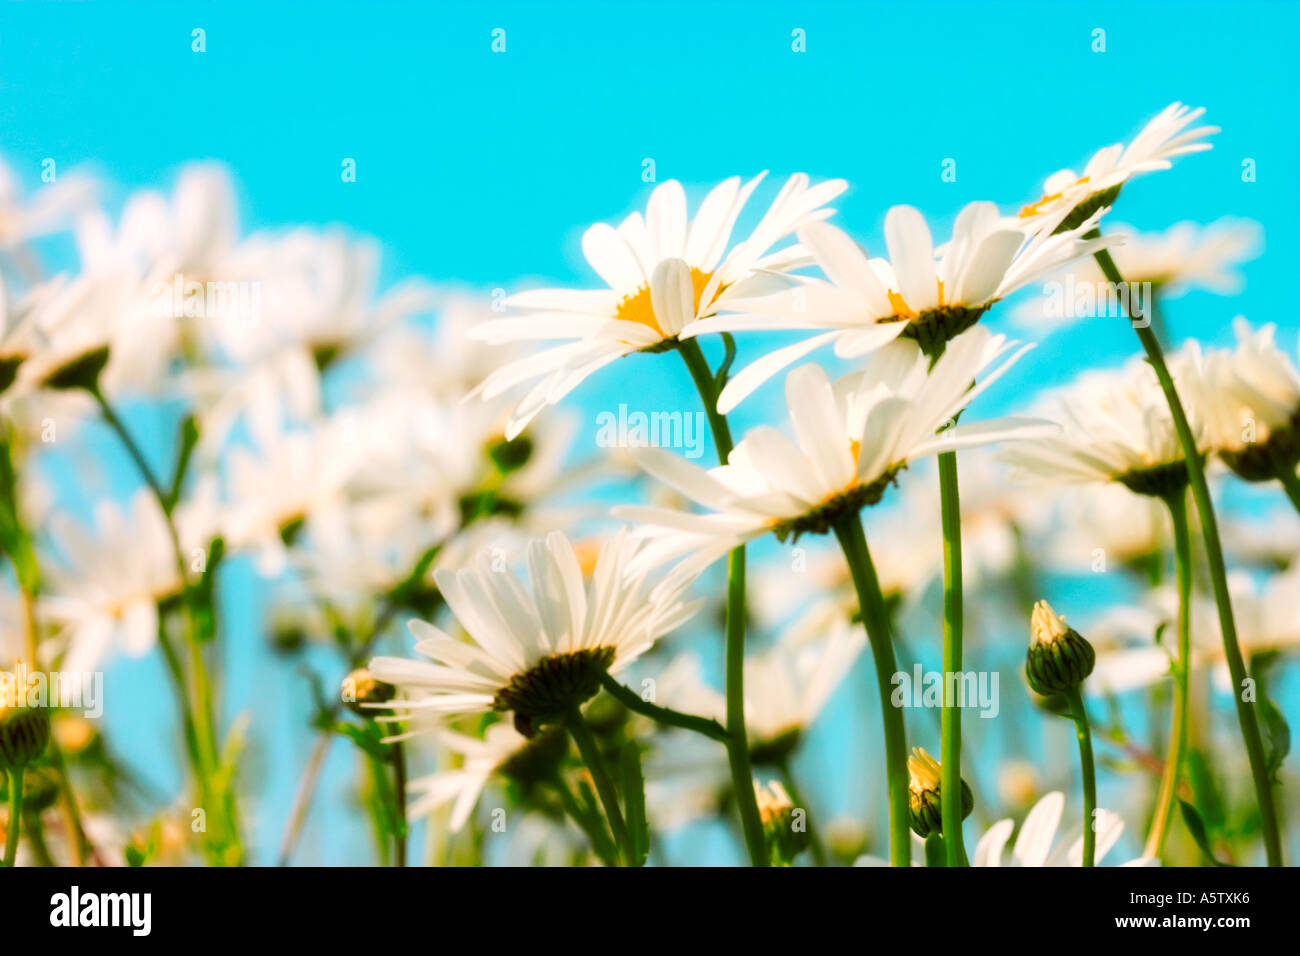 Worms eye view of daisies shot against vivid blue sky backdrop Stock Photo